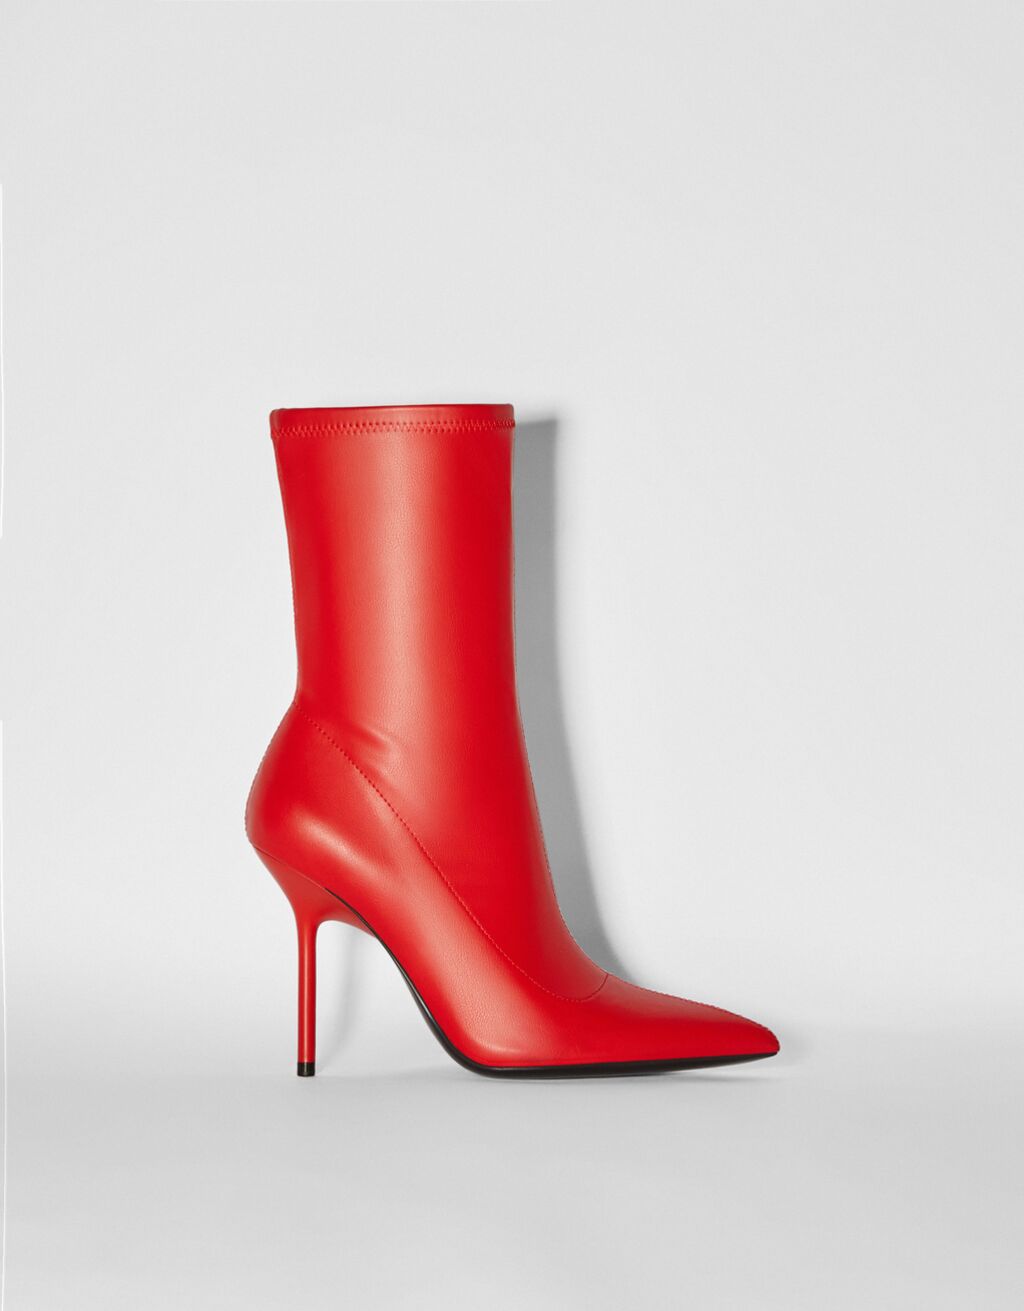 Fitted high-heel ankle boots